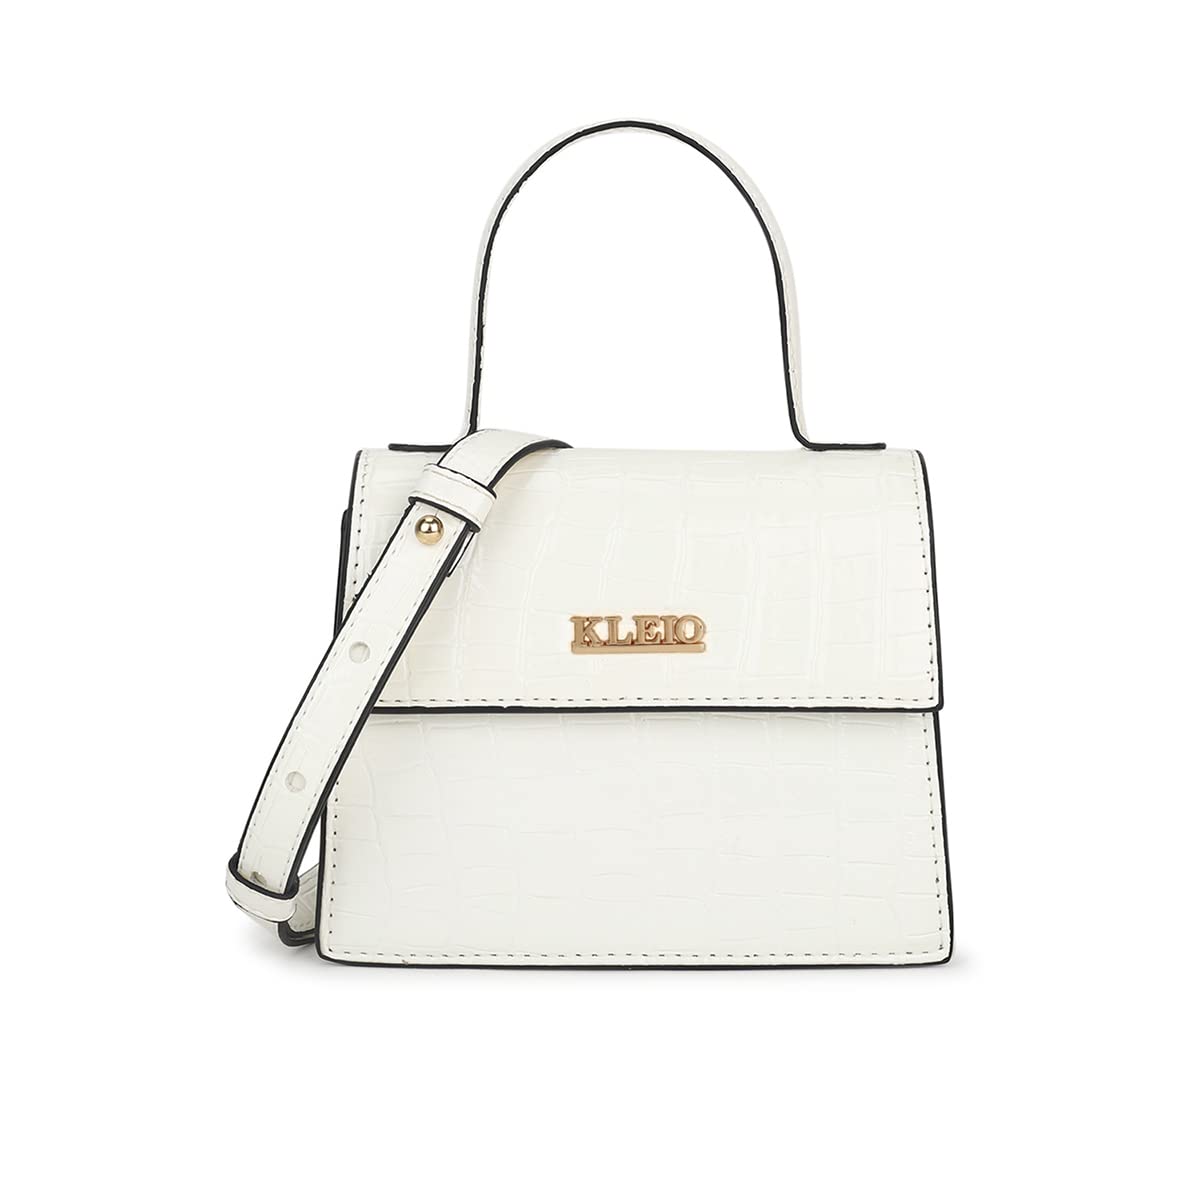 KLEIO PU Leather Mini Handbag for Women (White) with Top Handle | Detachable Crossbody Sling for Girls | Spacious Travel Hand Bag for Ladies to Carry Essentials